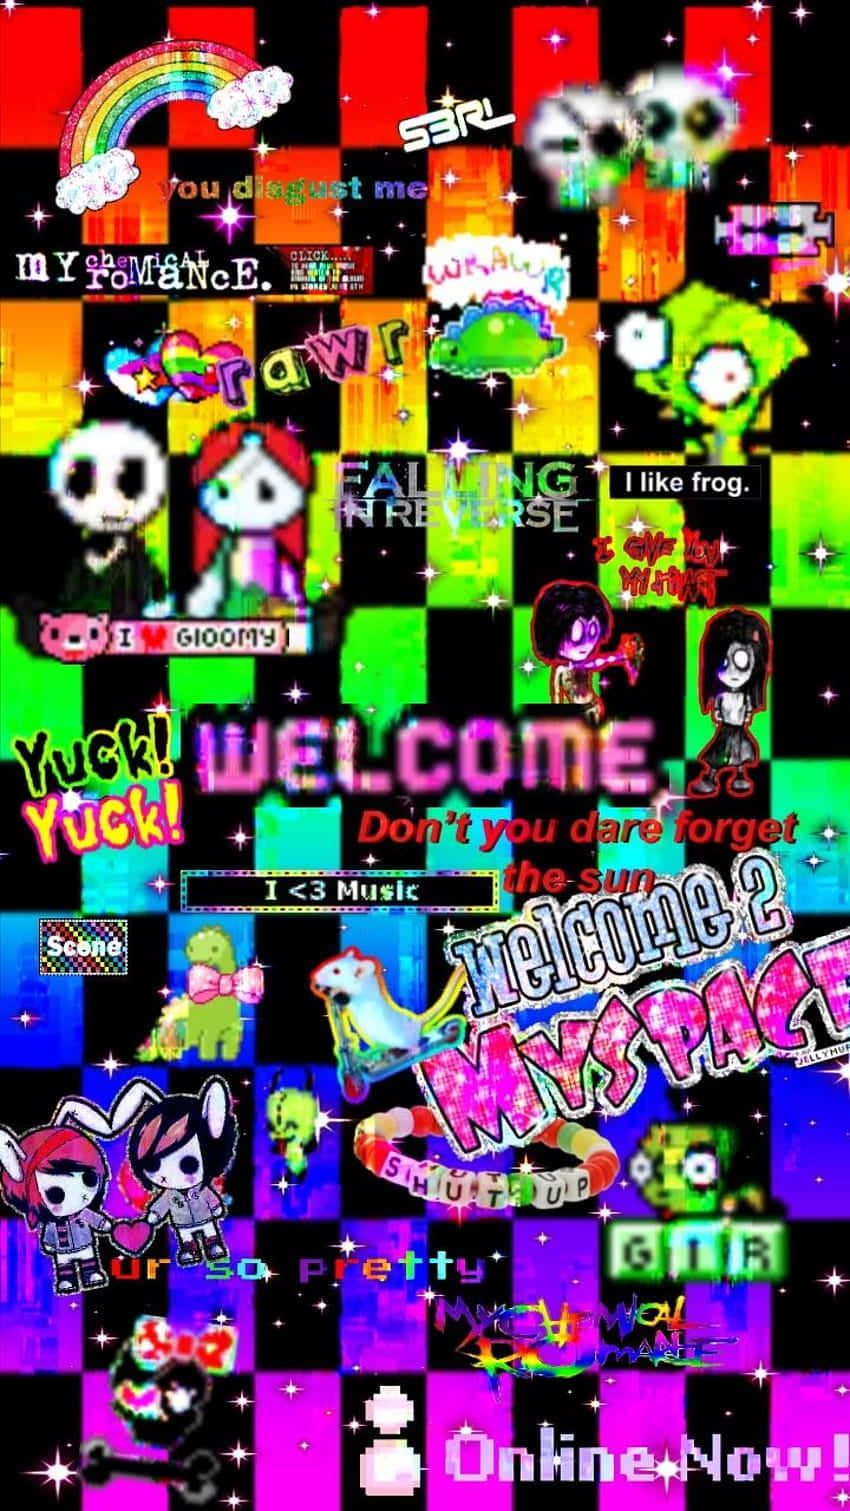 A collage of images from MySpace, including the word 